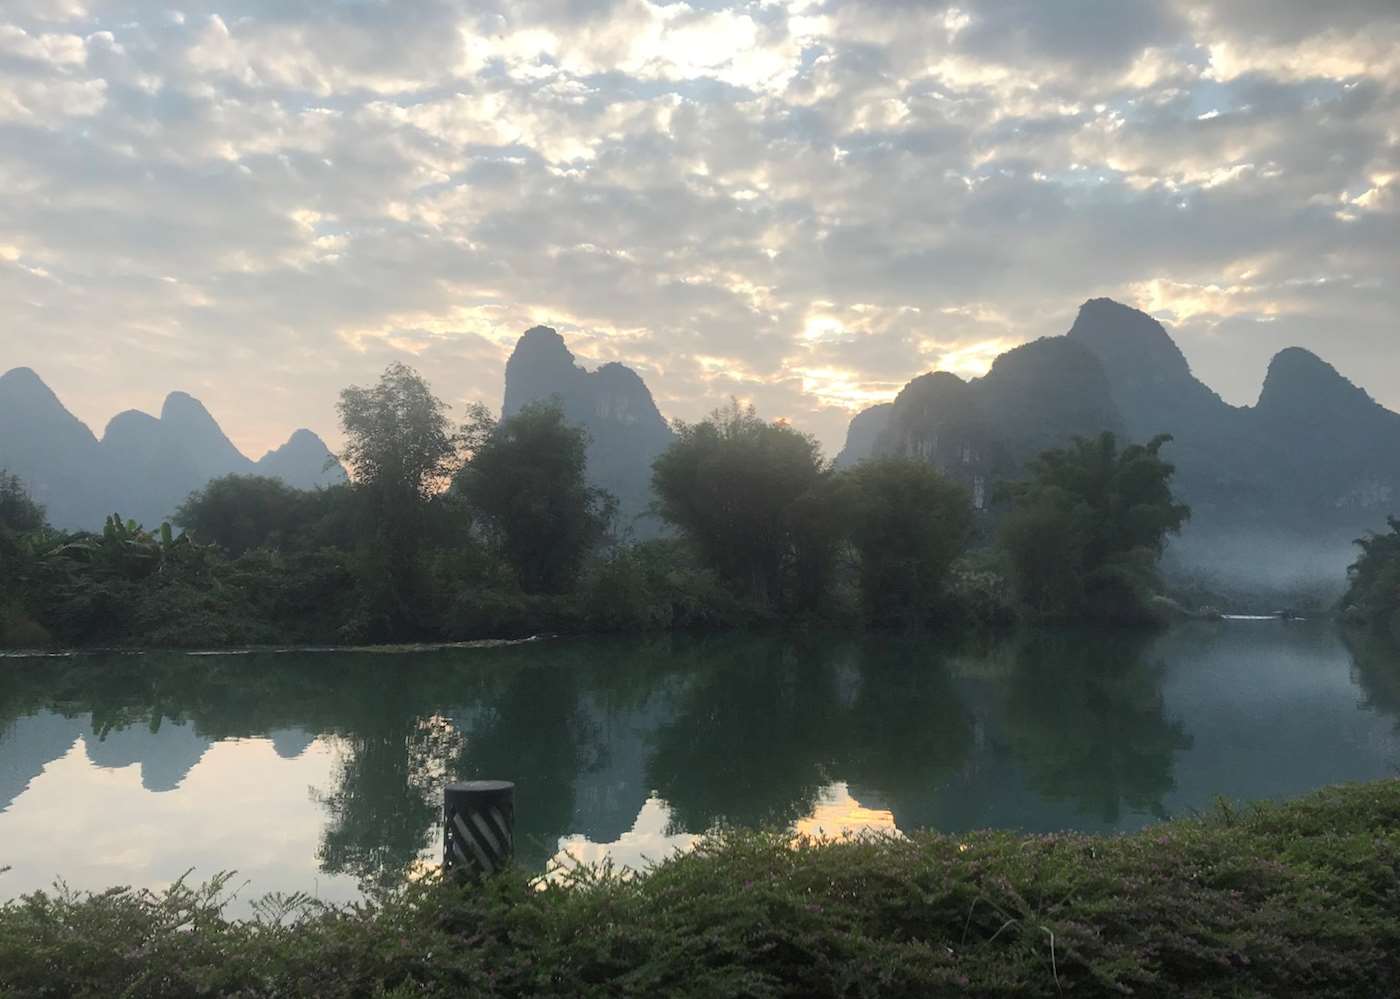 Visit Yangshuo on a trip to China | Audley Travel